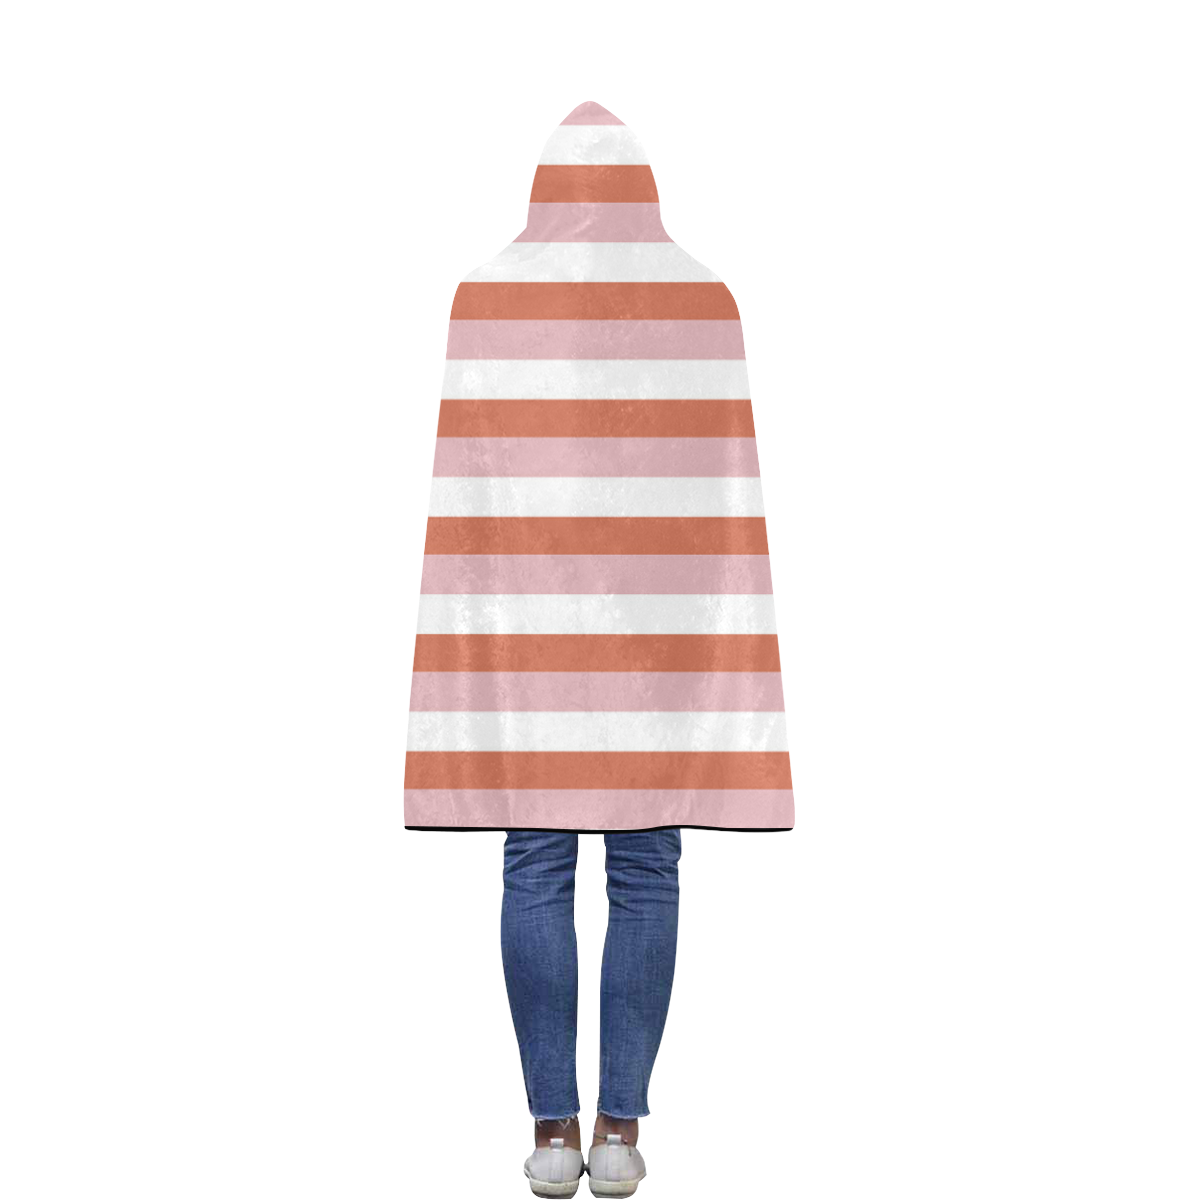 Coral Stripes Flannel Hooded Blanket 40''x50''